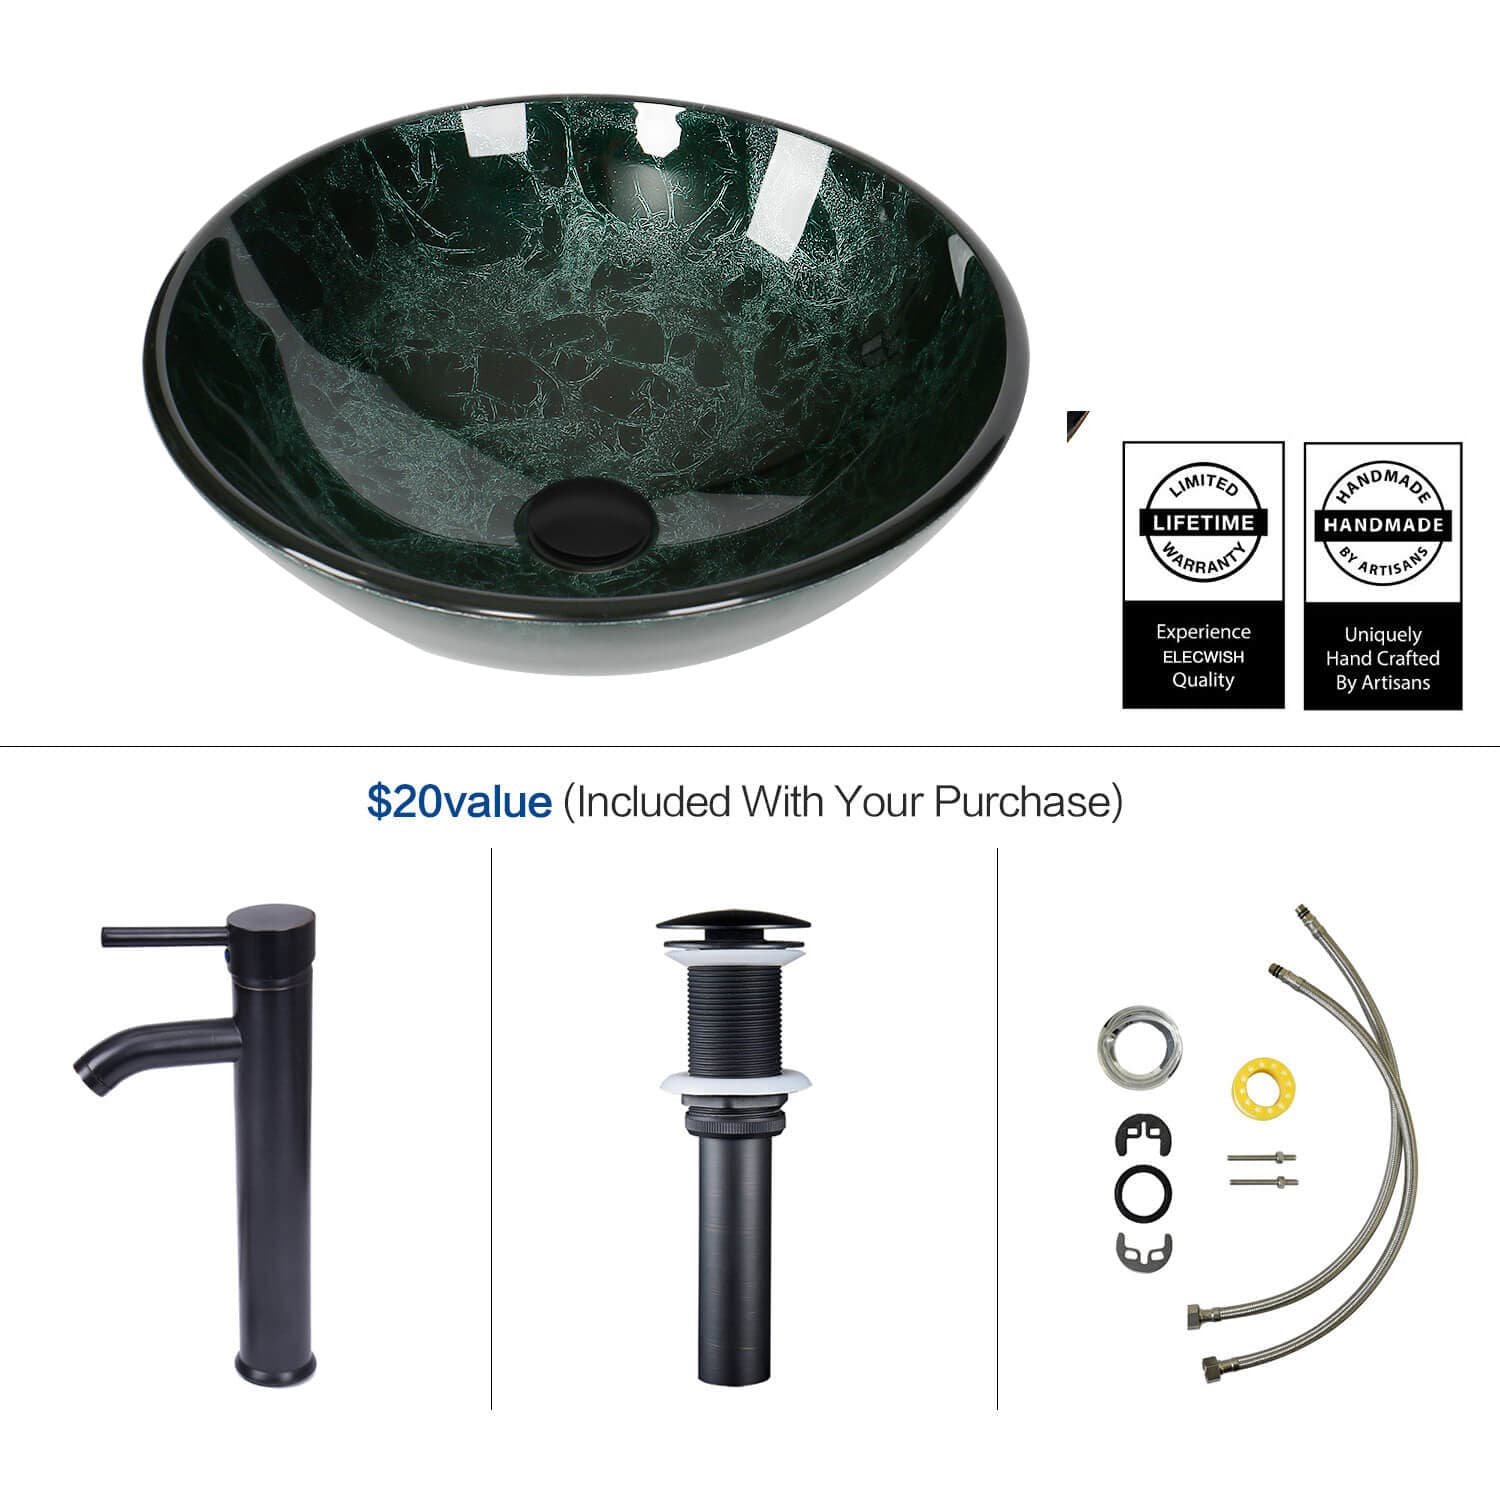 Complete parts of Elecwish Vessel Sinks Bathroom Artistic Vessel Sink Glass Bowl Faucet Drain Combo,Green are included